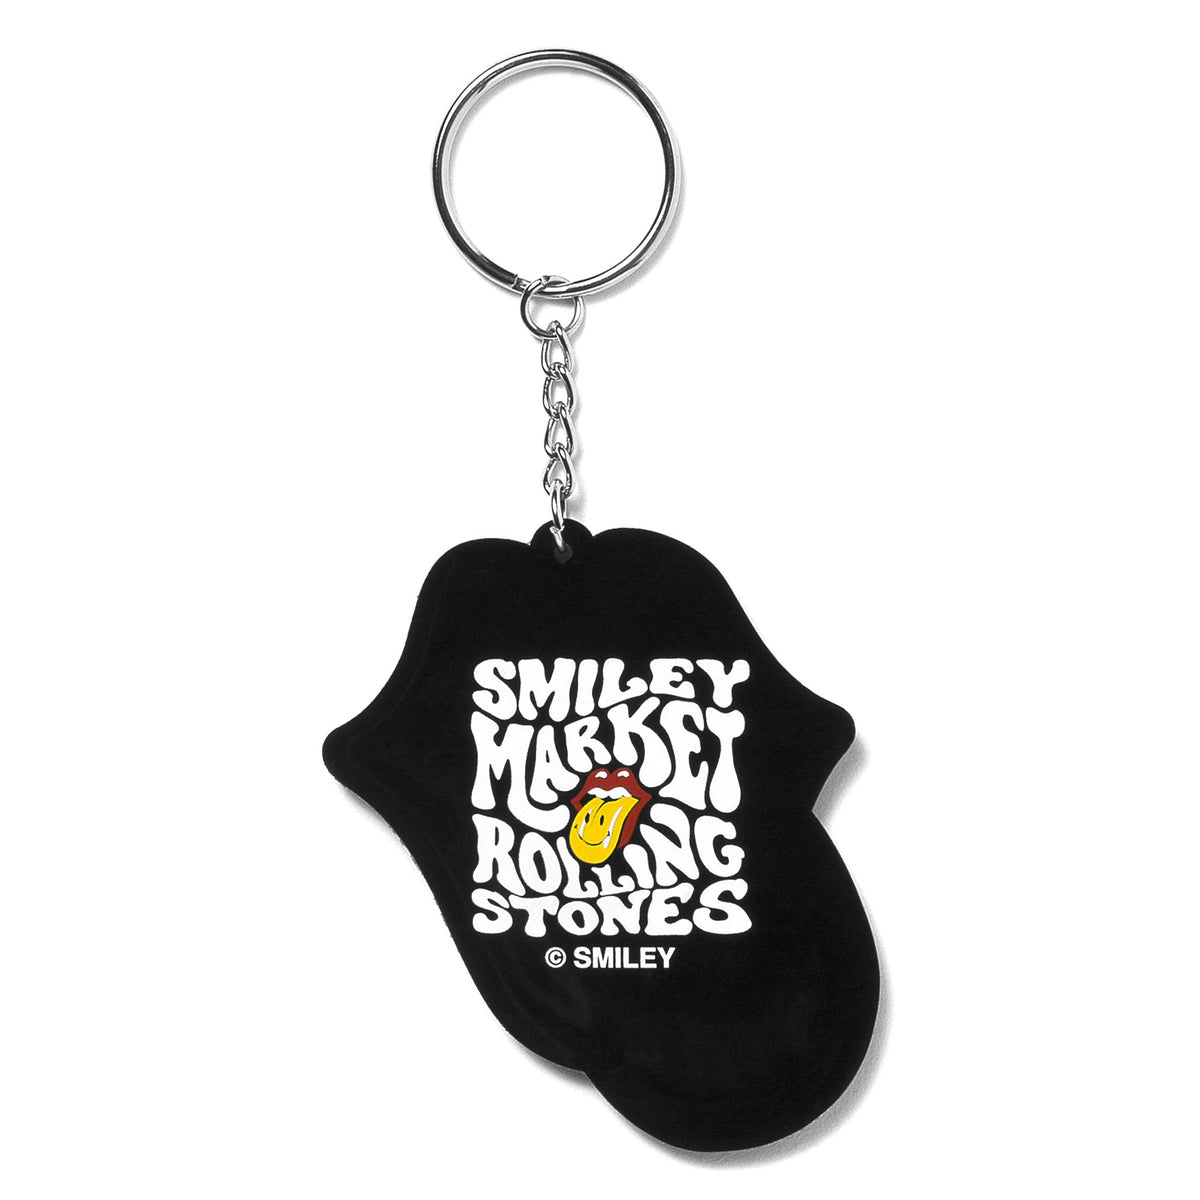 Smiley Market Rolling Stones Tongue Keychain